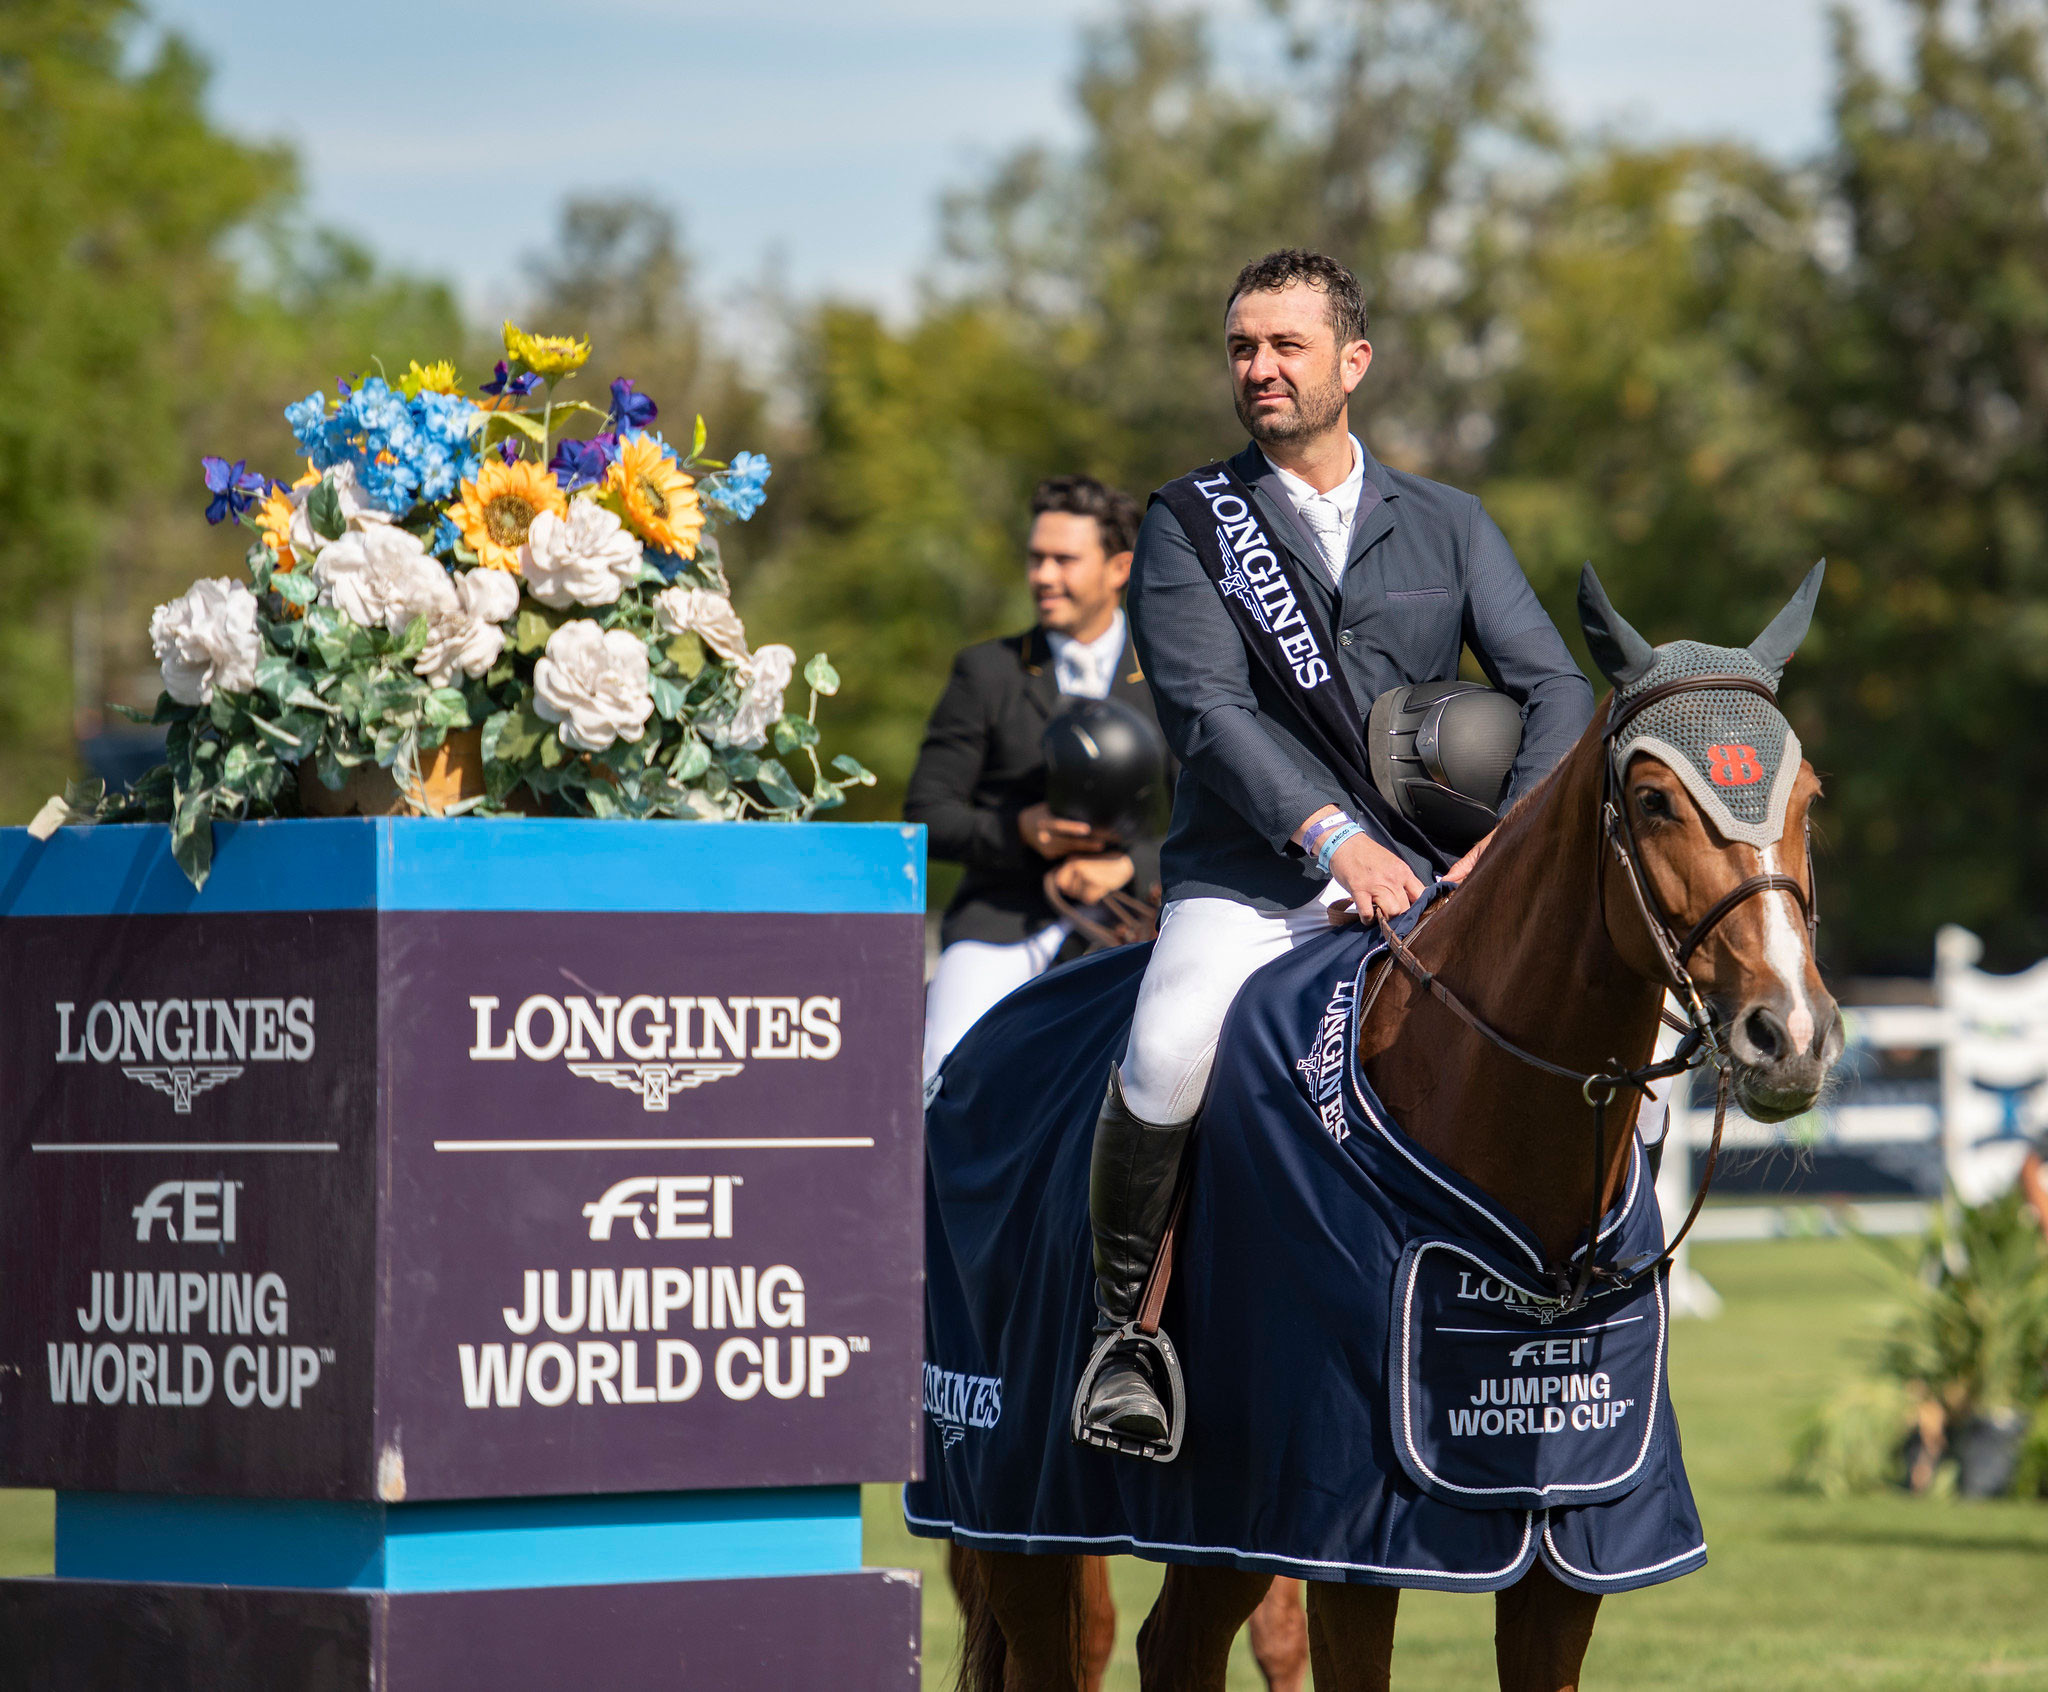 Onate records home victory at FEI Jumping World Cup in León